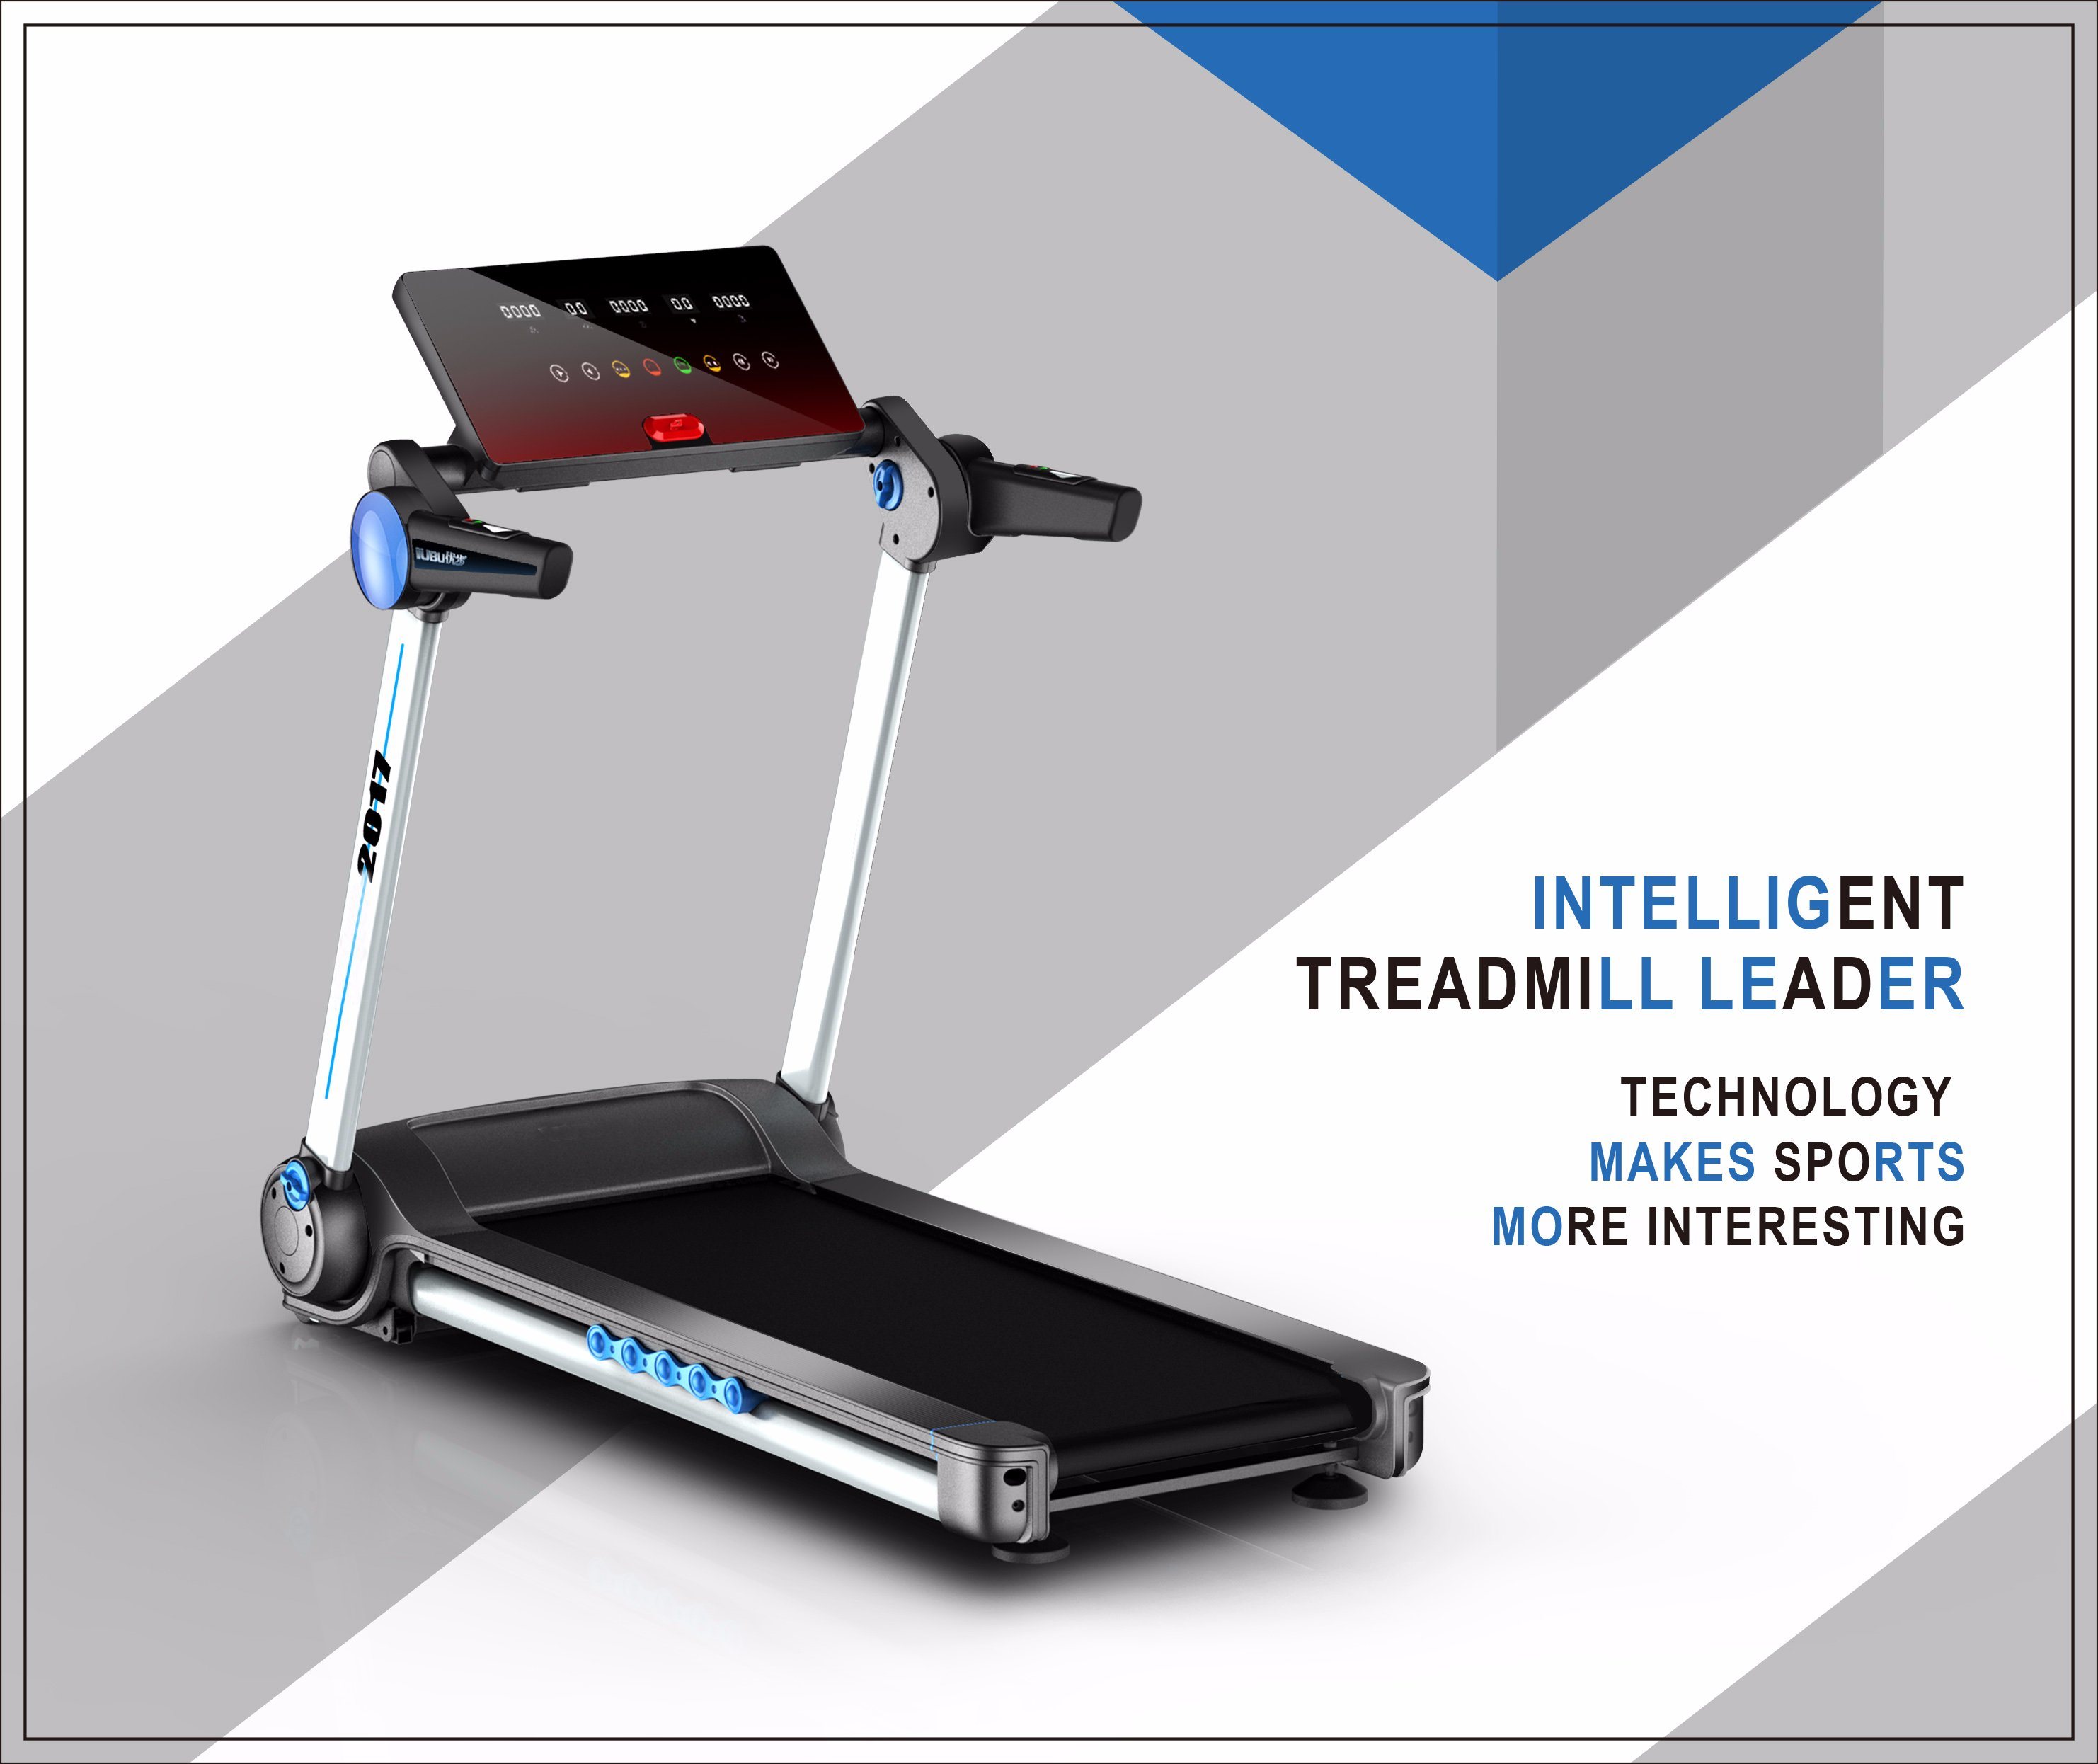 K5 Exquisite Professional Home Use Treadmill